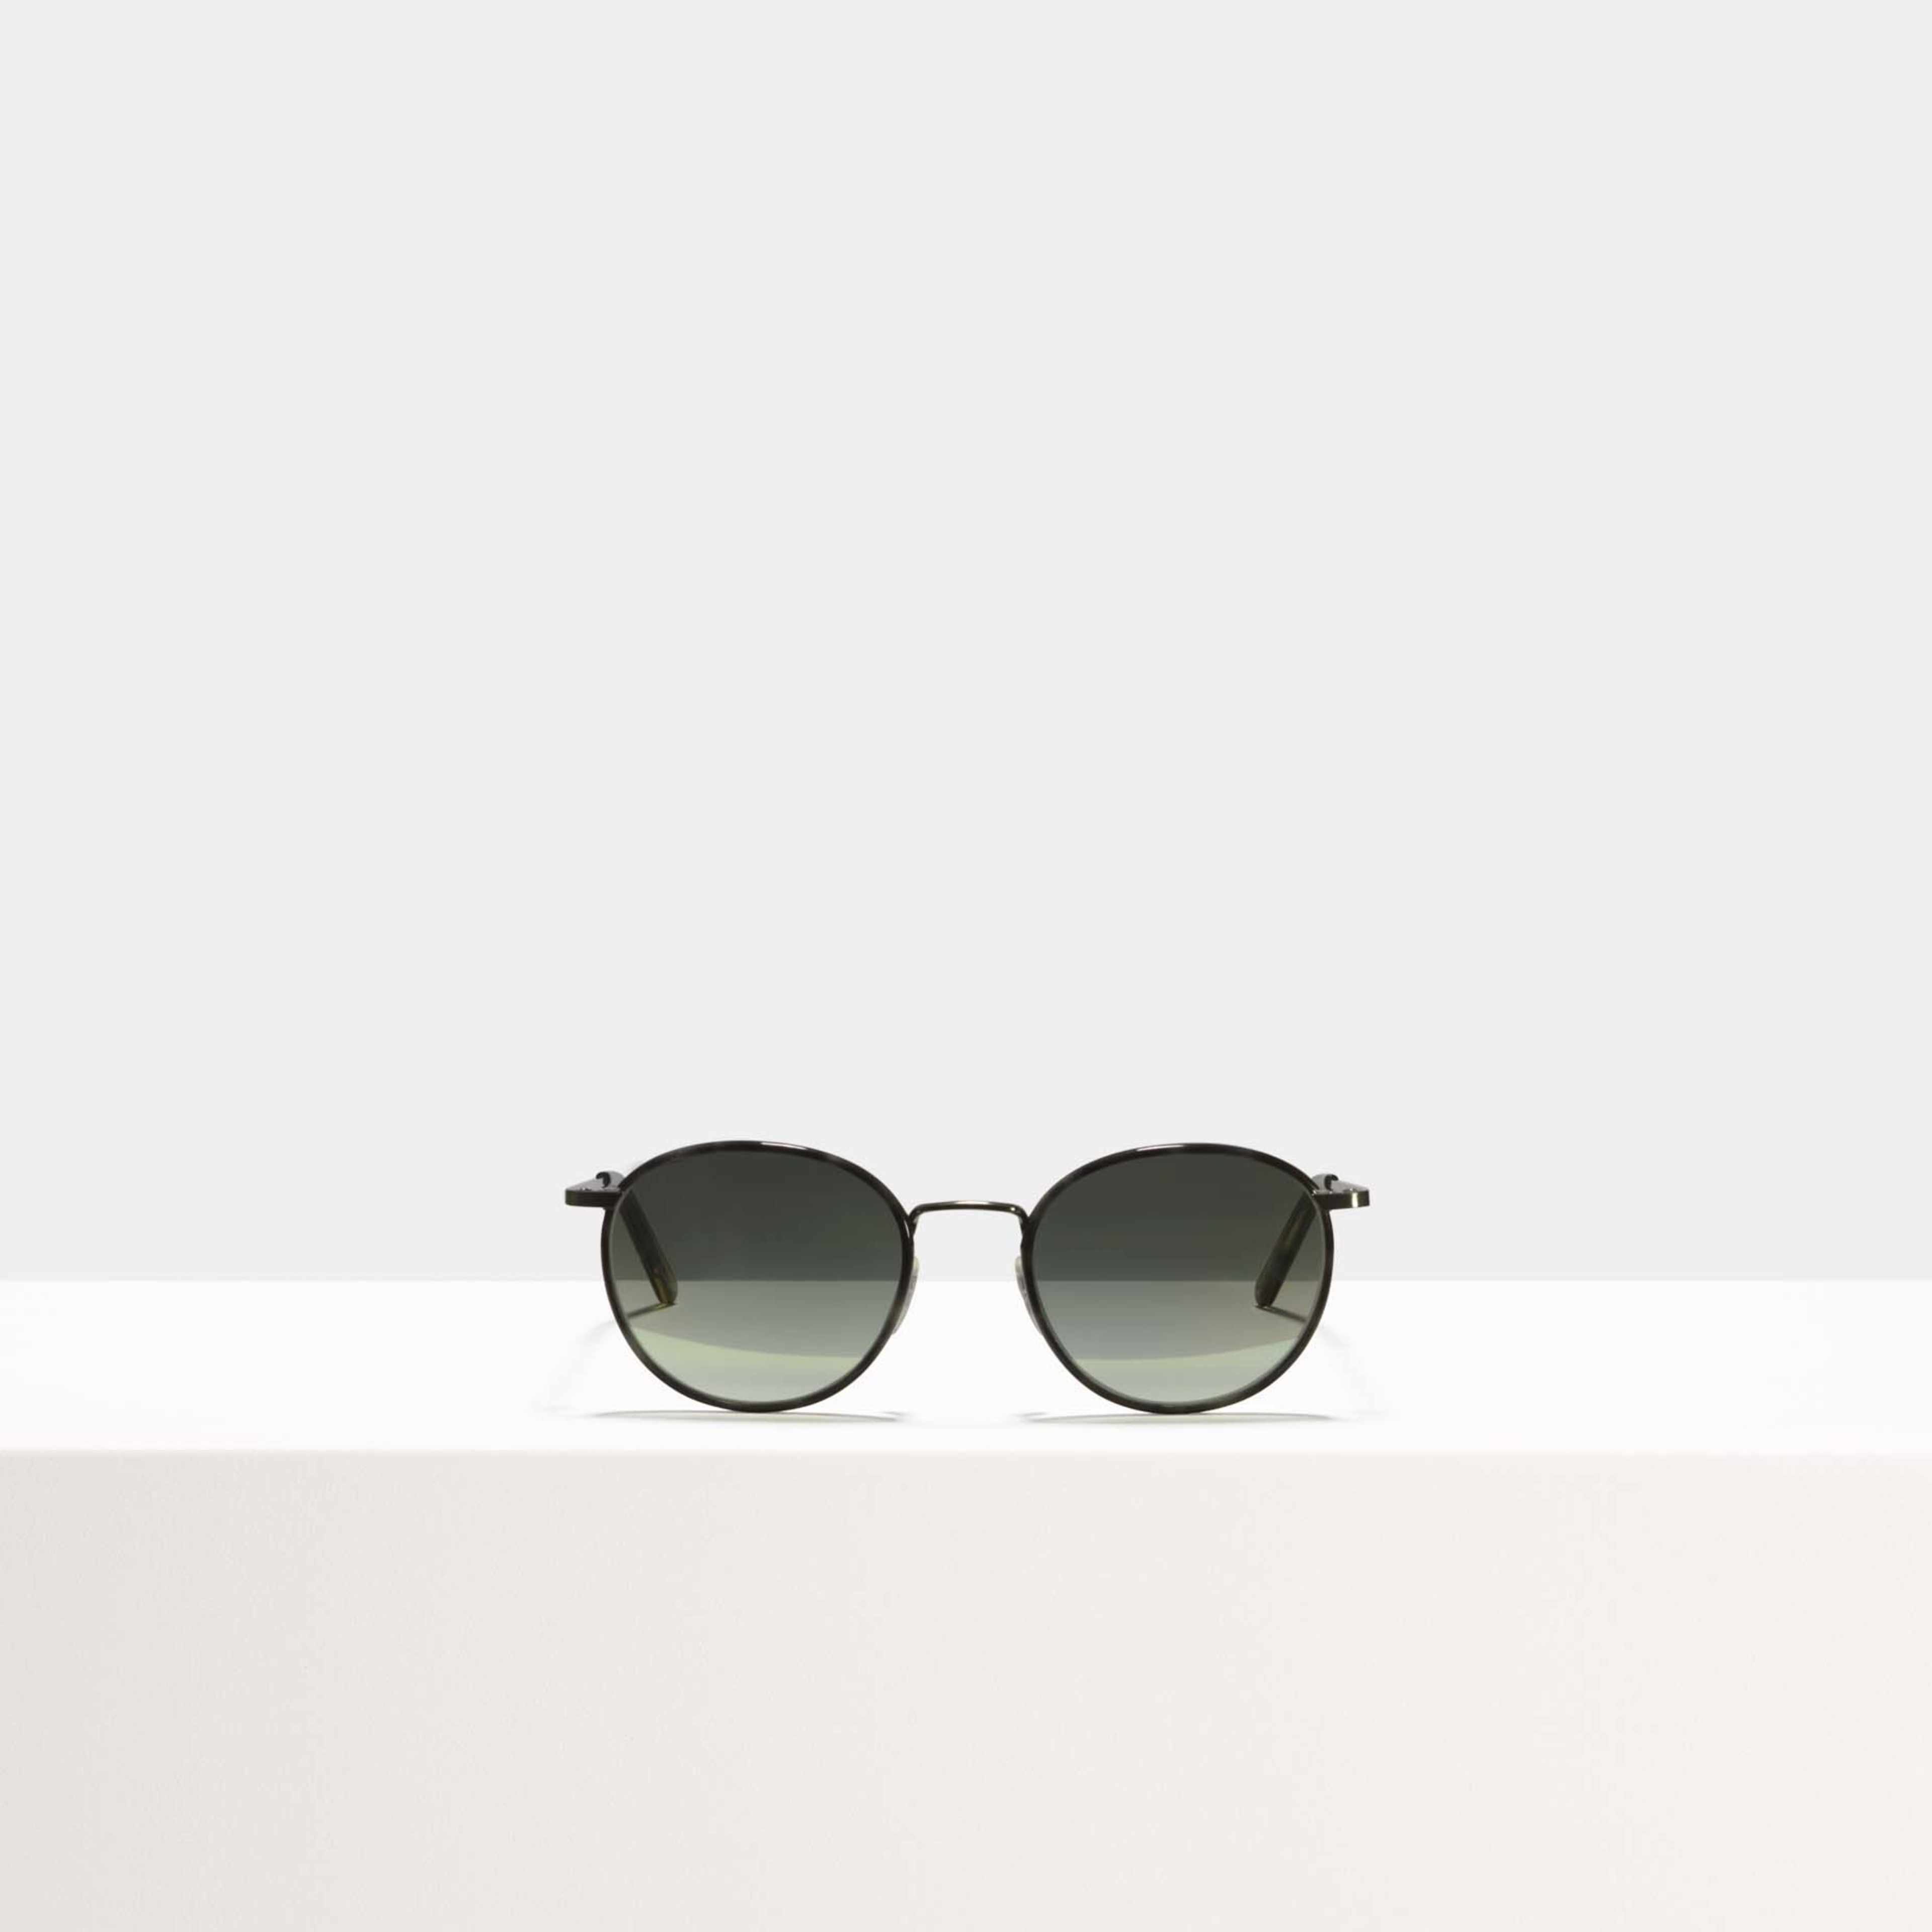 Ace & Tate Solaires | ronde métal in Vert